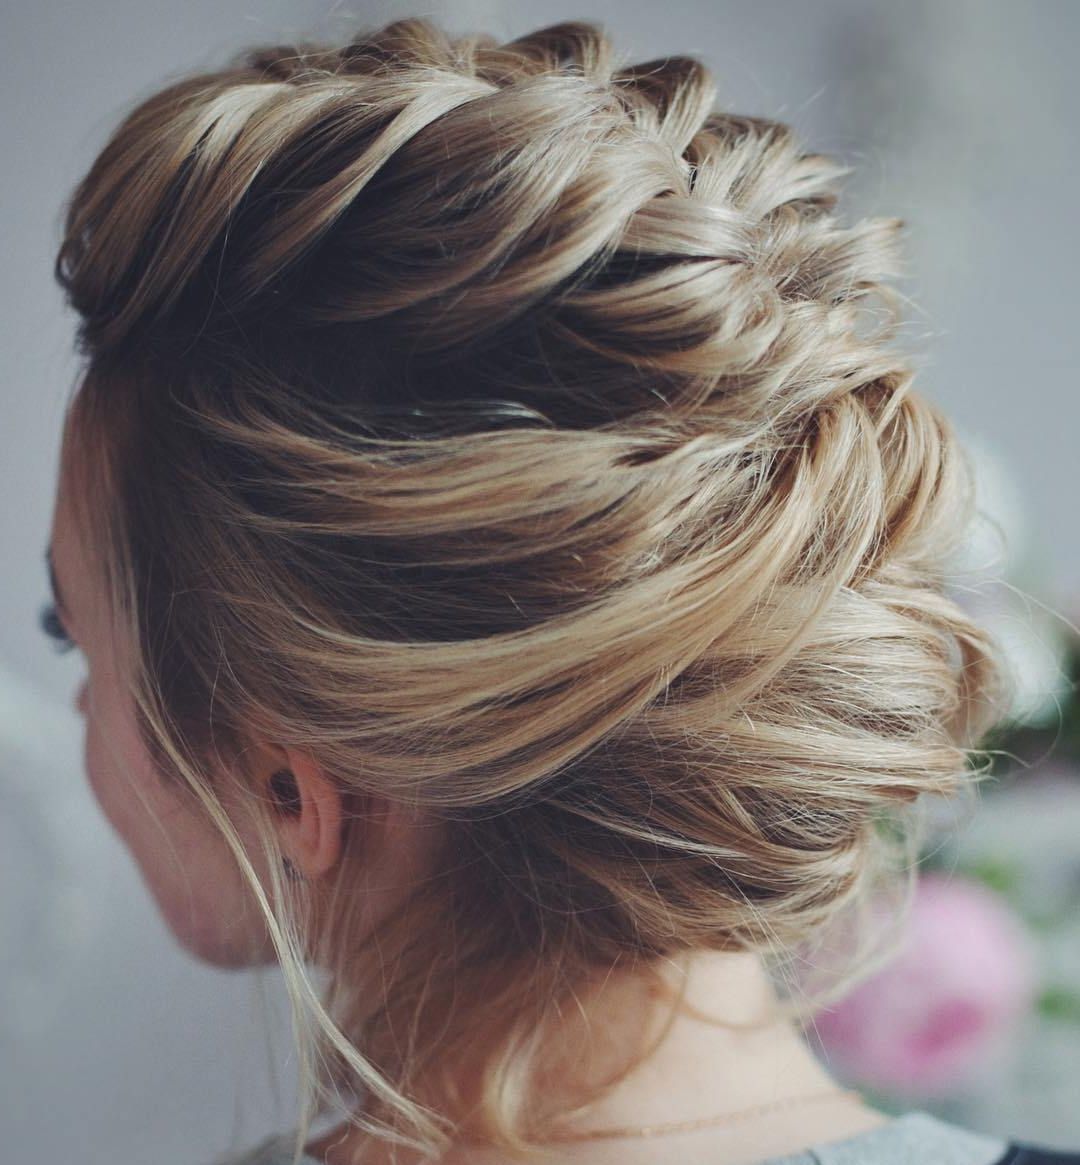 50 Hottest Prom Hairstyles For Short Hair Throughout Short Hairstyles For Prom Updos (View 1 of 25)